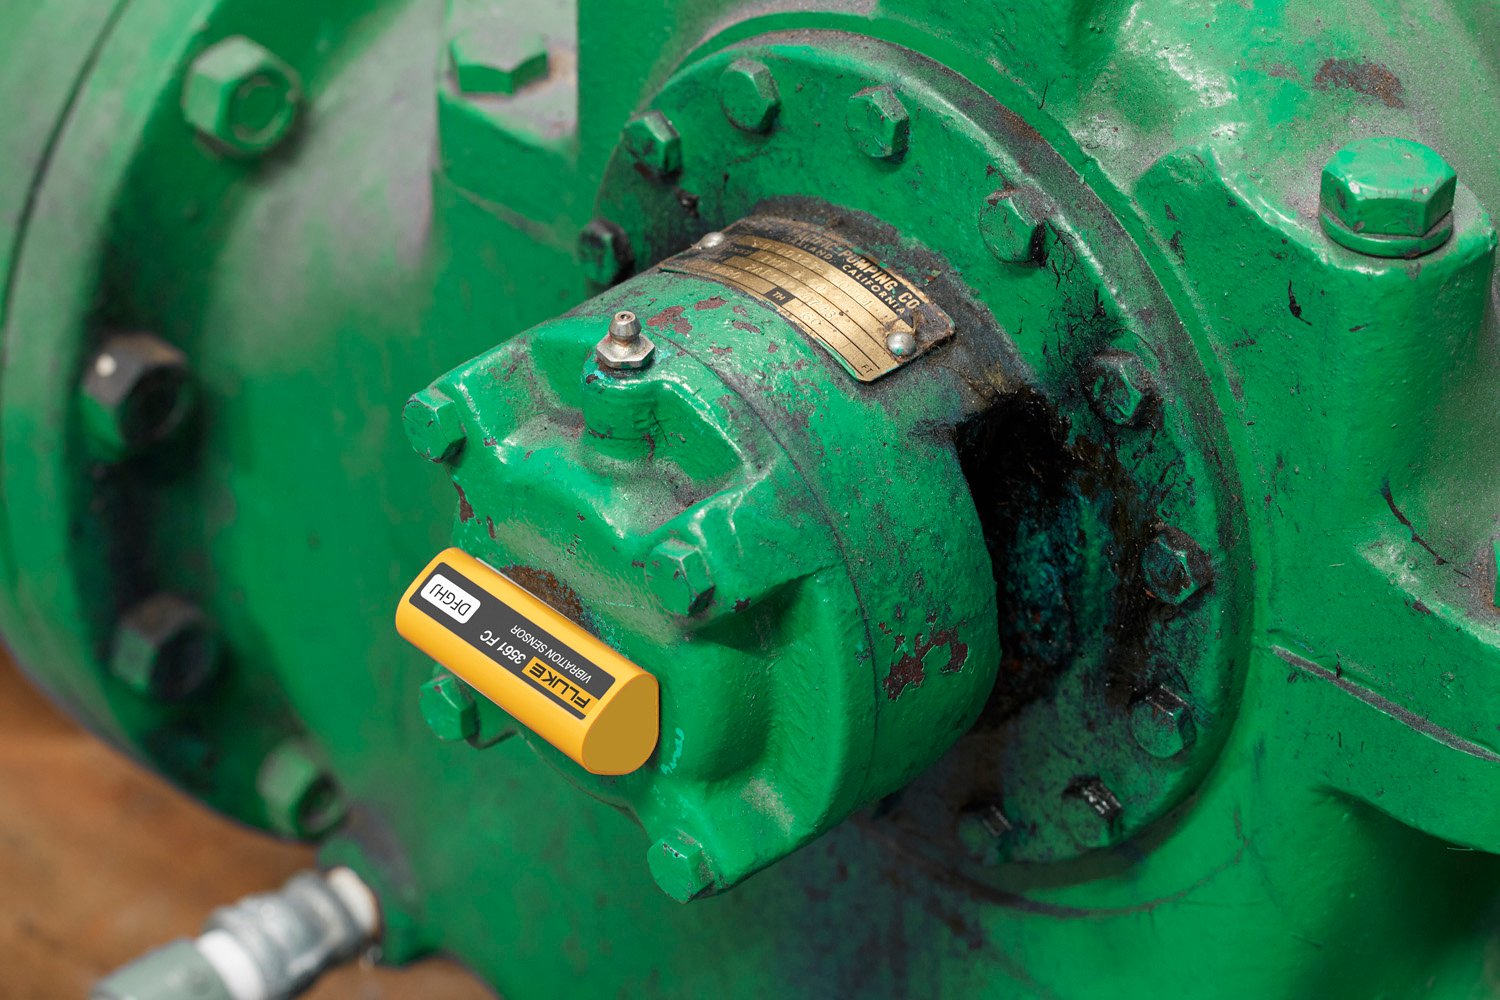 A clickable image of a vibration sensor installed on an asset. Leads to the vibration monitoring page